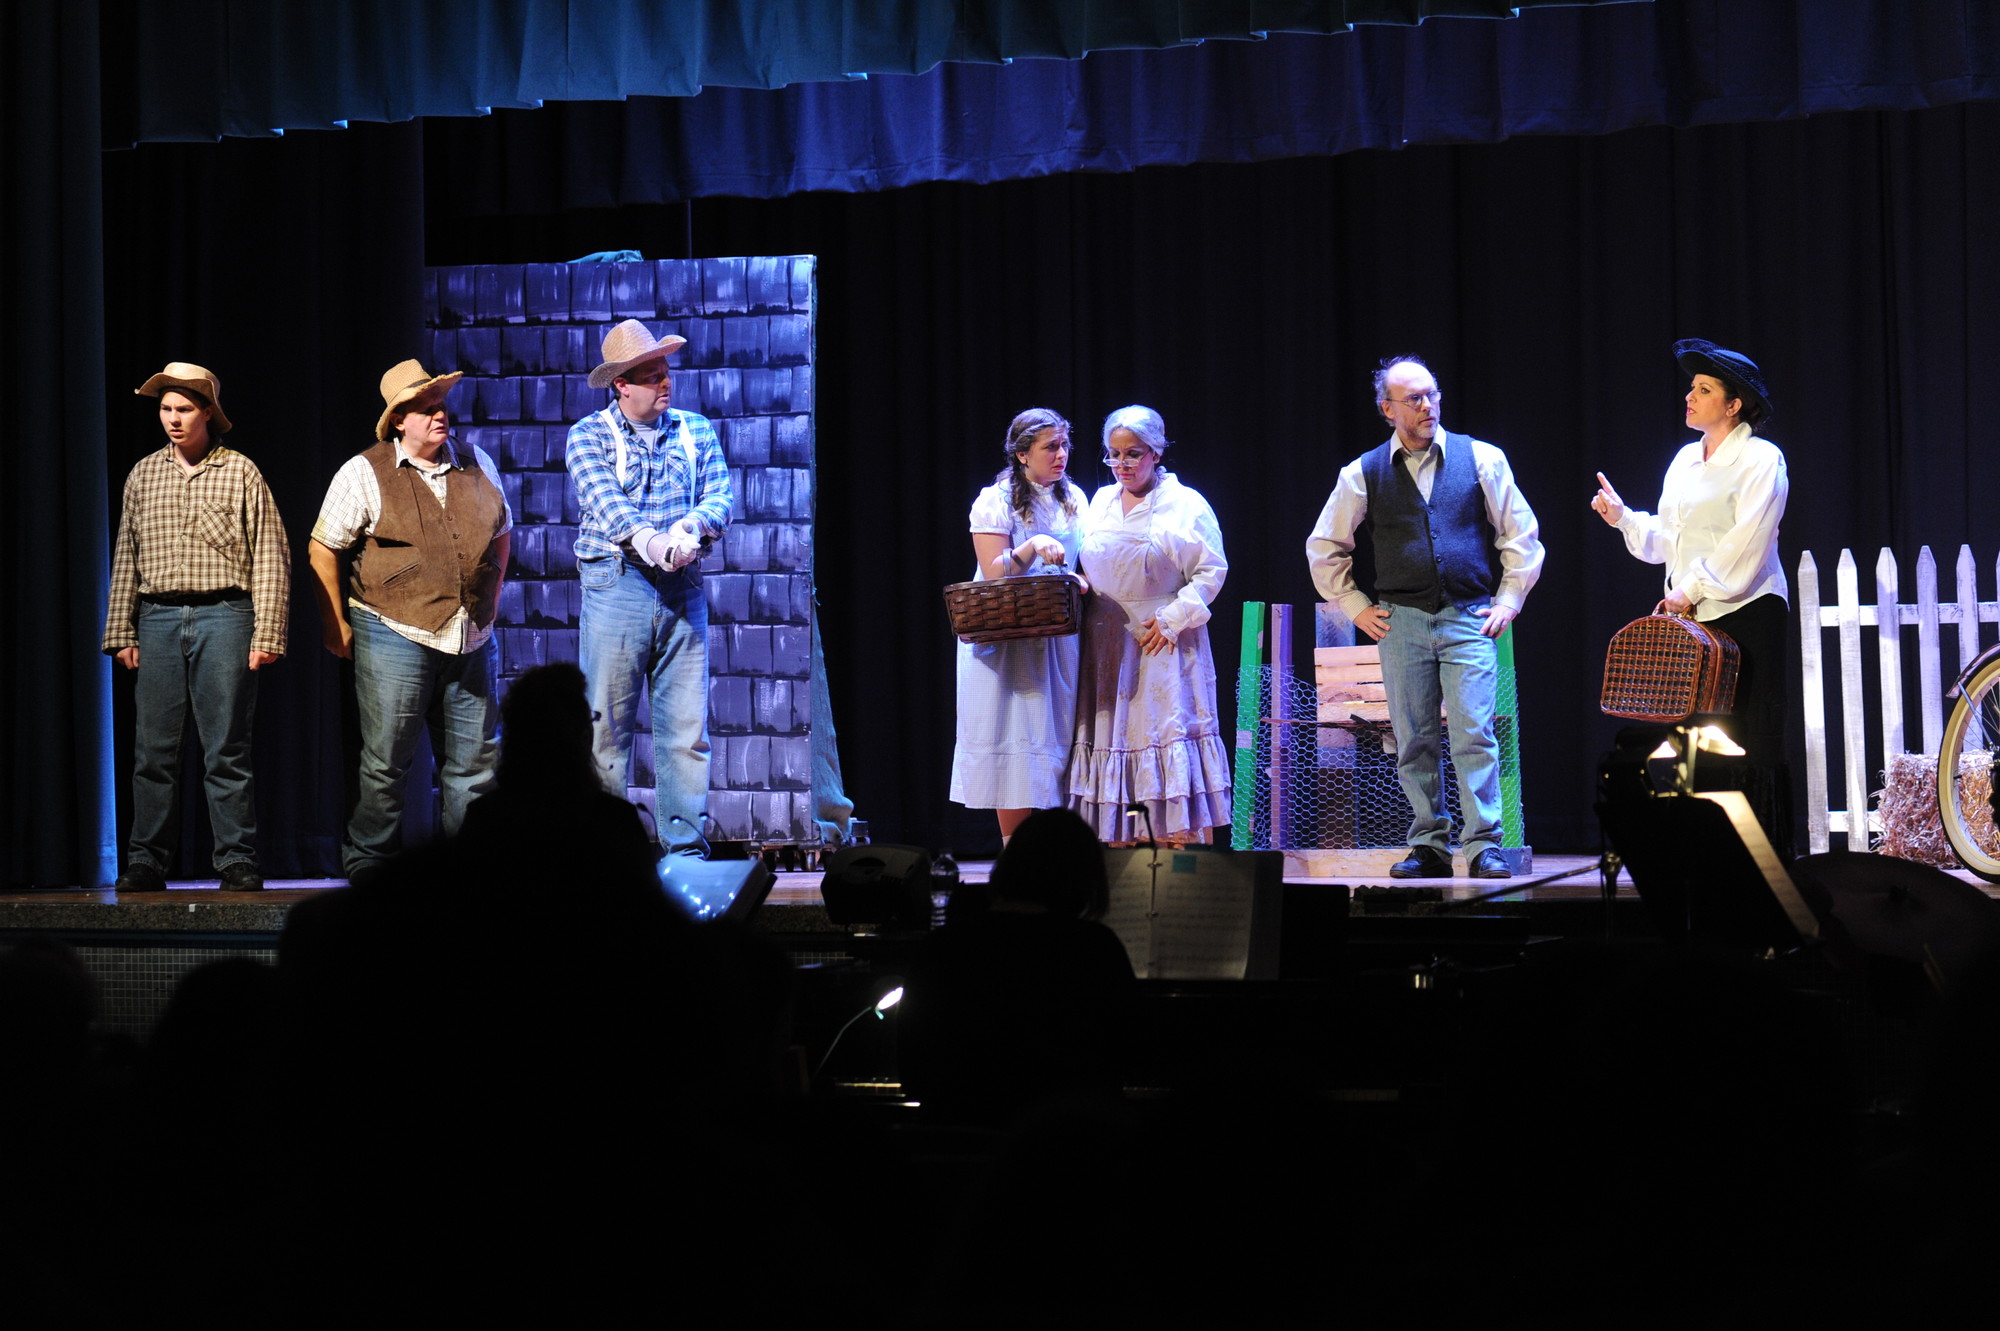 Dorothy Gale, center, played by Marissa Feminella, of Island Park, was confronted on her family’s farm by Almira Gulch, played by her real-life mother, Dana Feminella, far right, who also played the Wicked Witch of the West. Also pictured, from left, were Billy O’Brien, of Valley Stream; Larry Schneider, of Oceanside; Monica Gerand, of Hewlett, and Bobby Newman, of Long Beach.